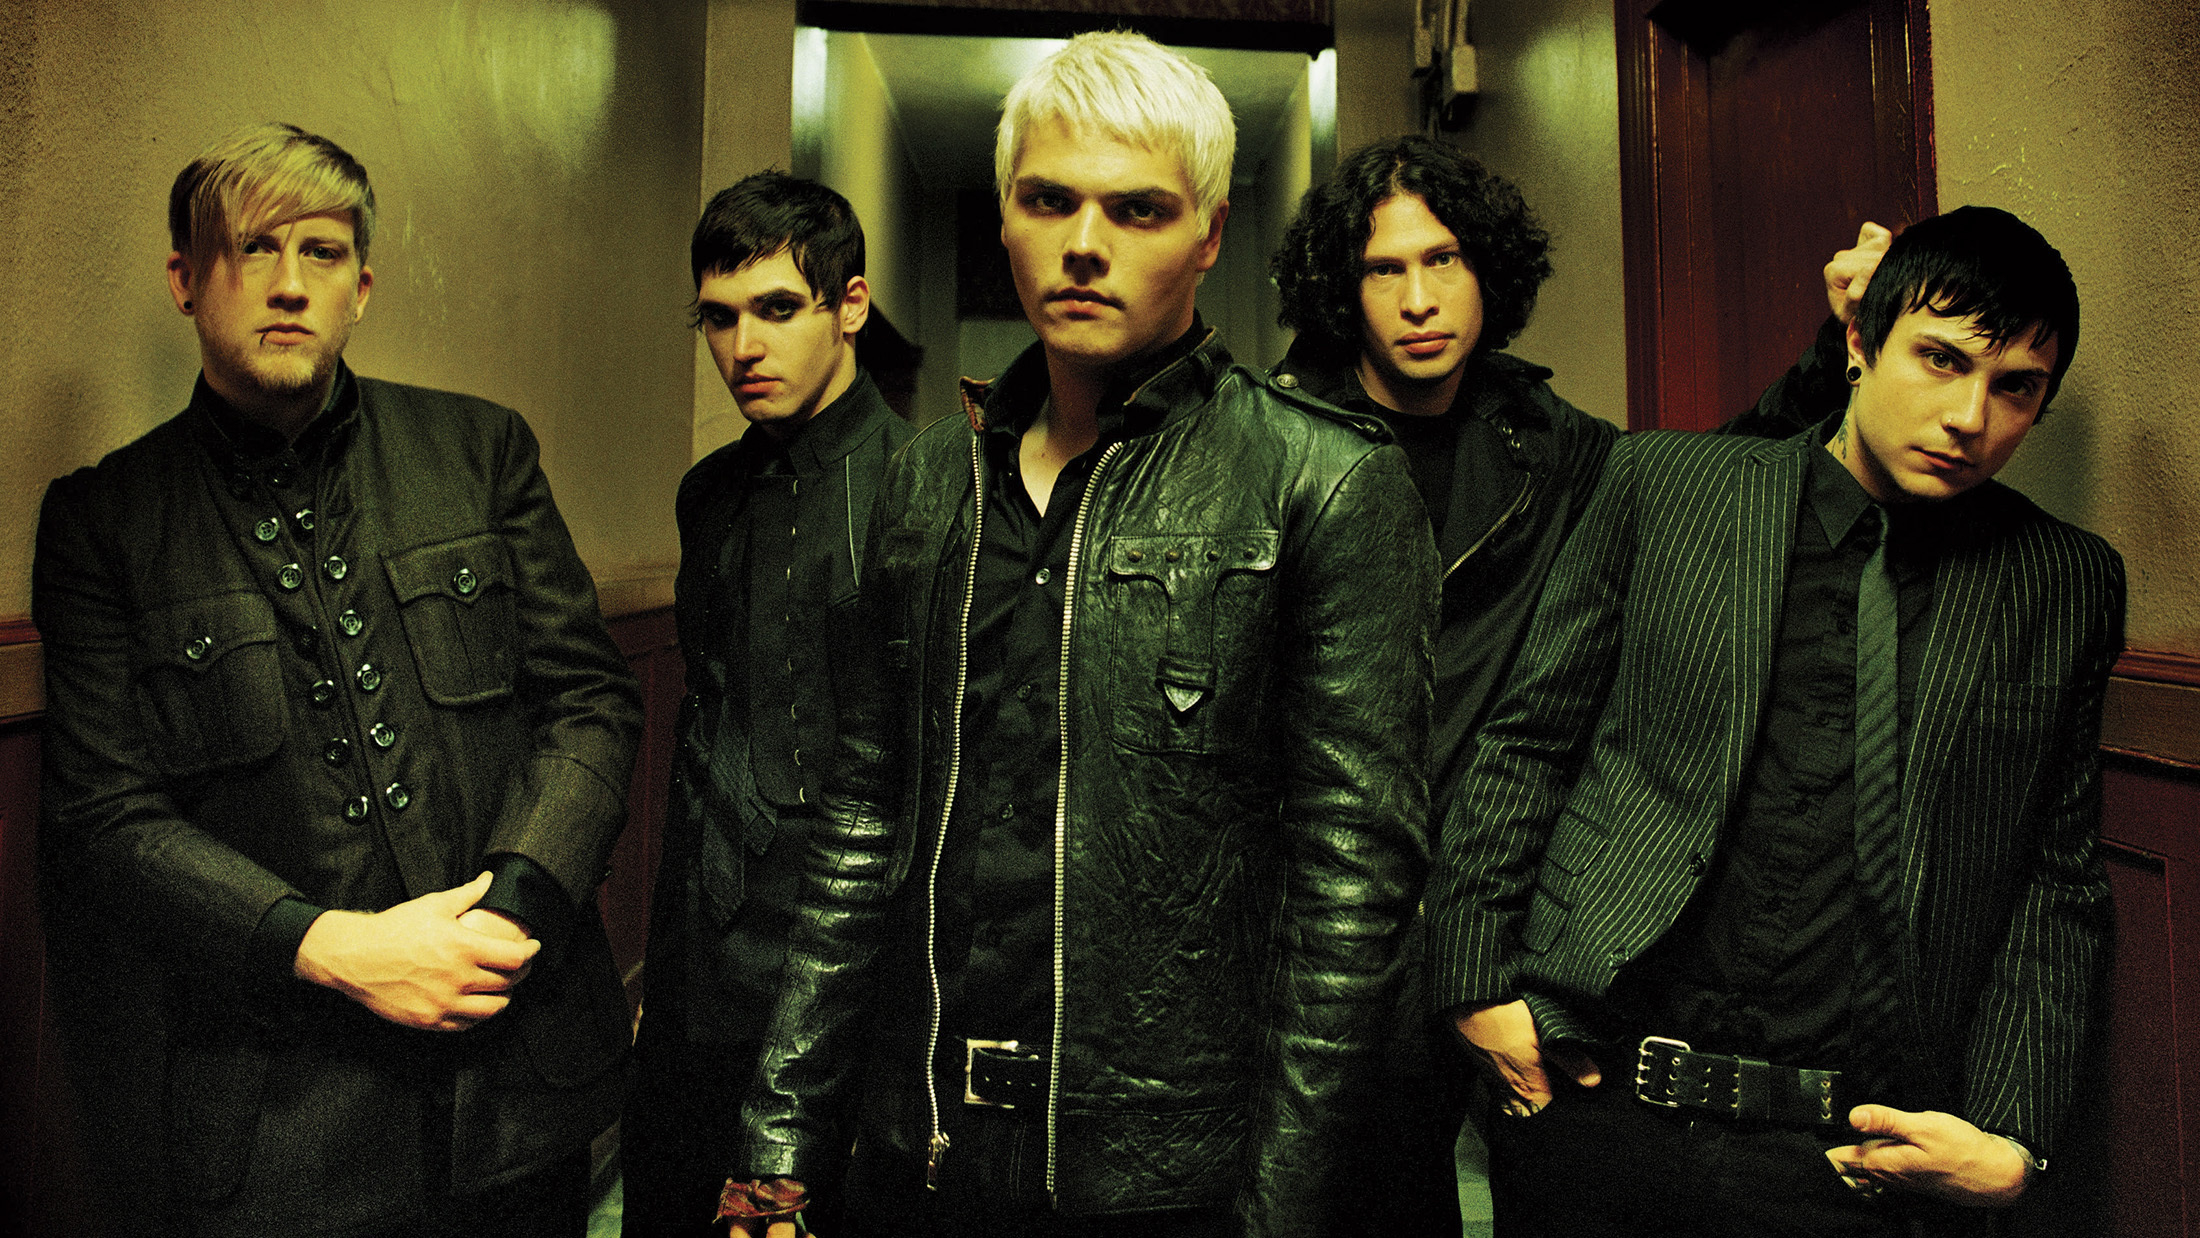 2200x1238 My Chemical Romance mark 15 years of The Black Parade: